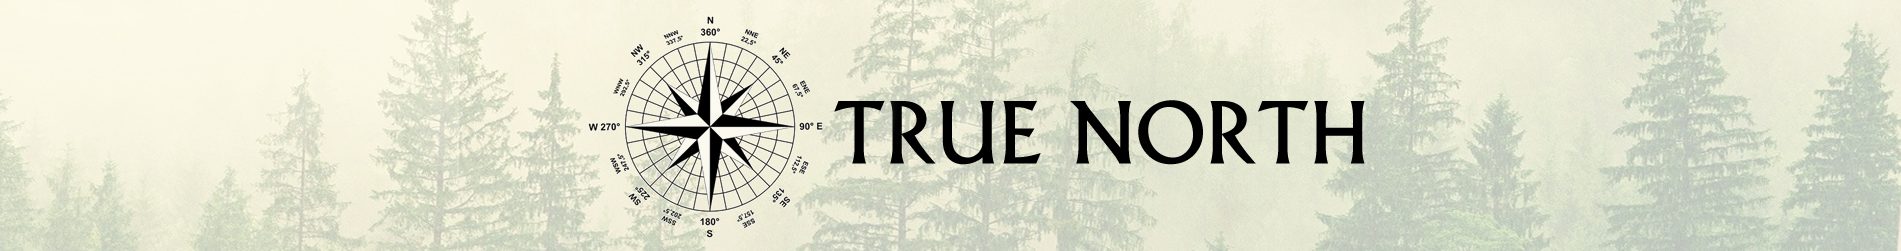 banner for TRUE NORTH